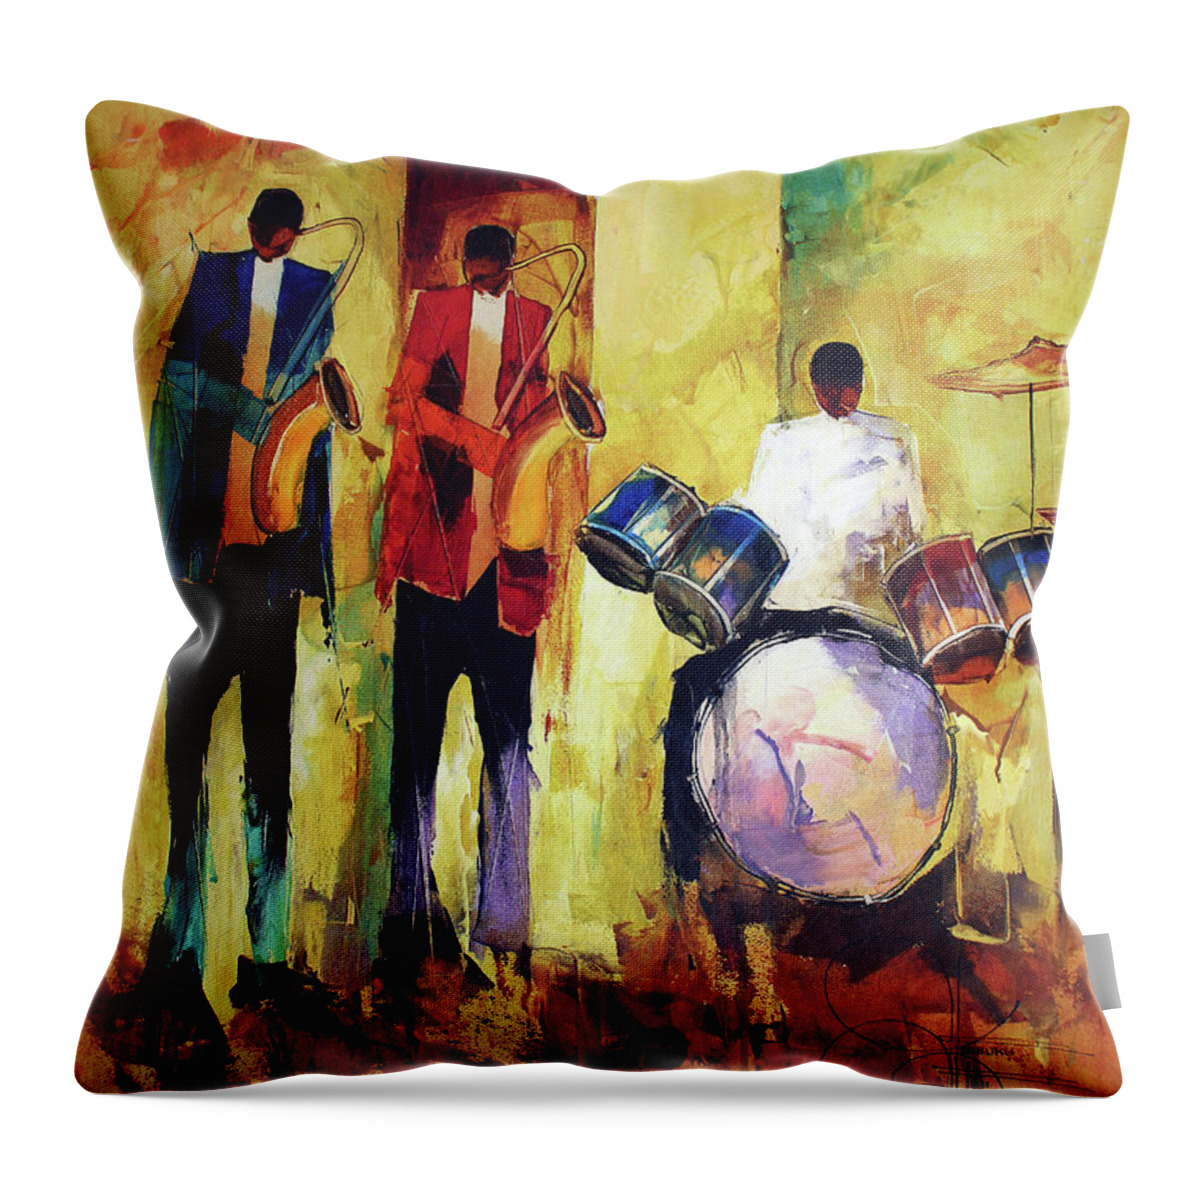 Nni Throw Pillow featuring the painting Early Hours by Ndabuko Ntuli